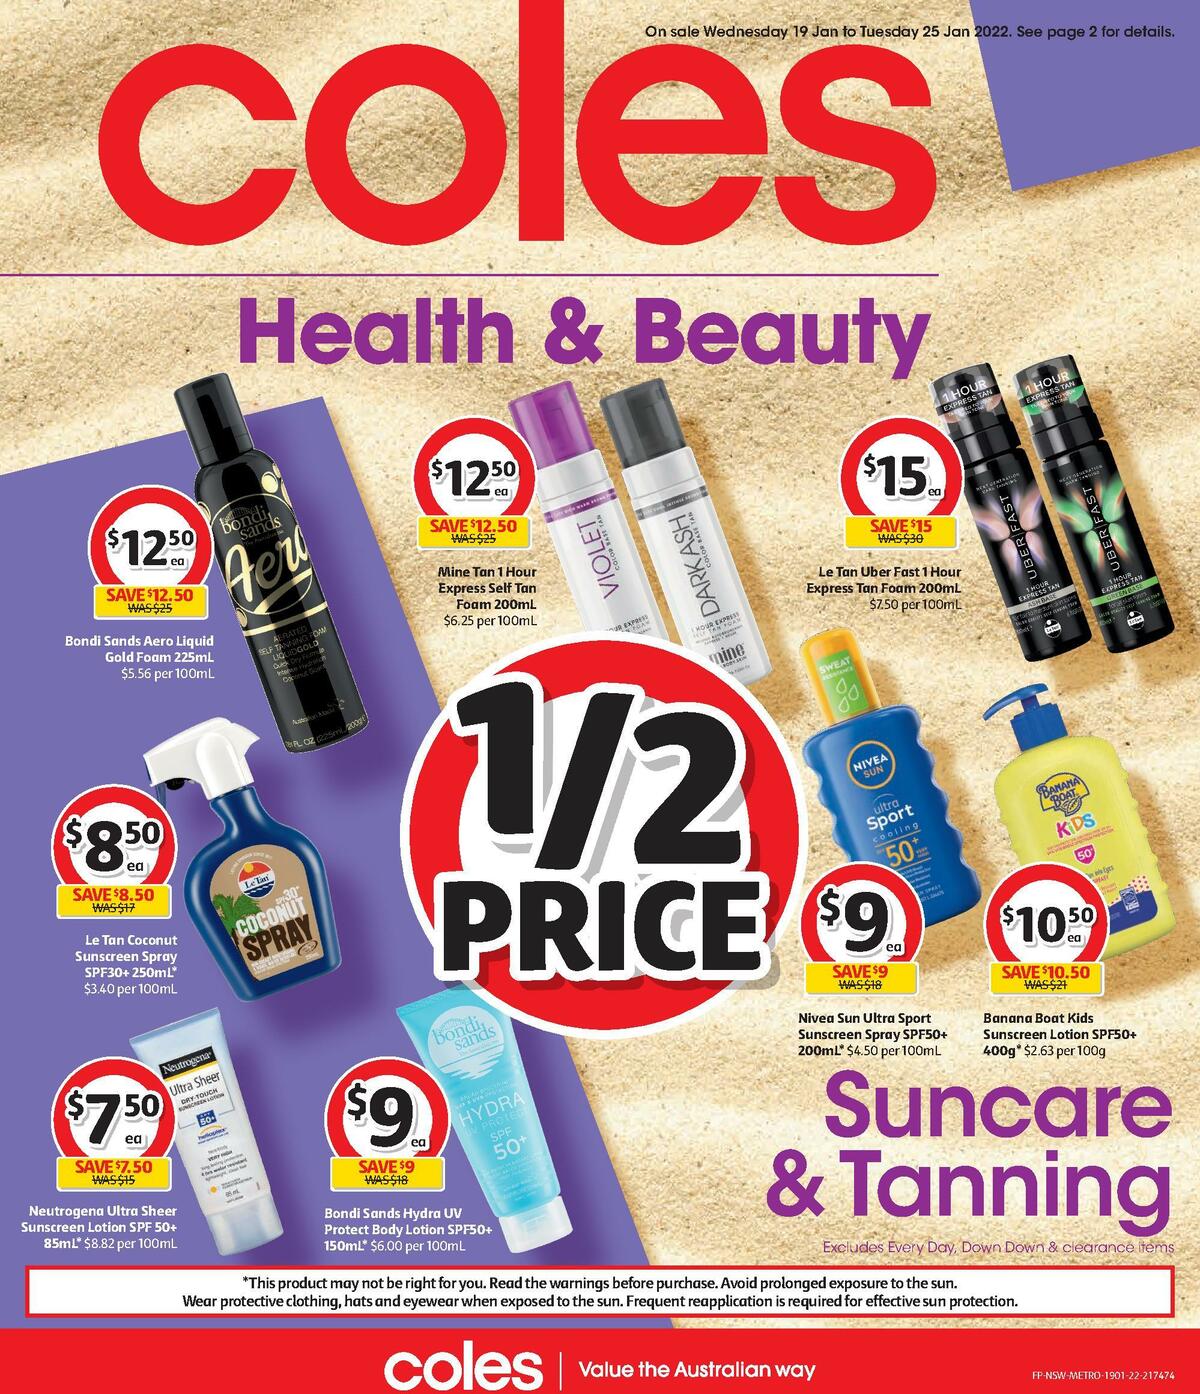 Coles Health & Beauty Catalogues from 19 January